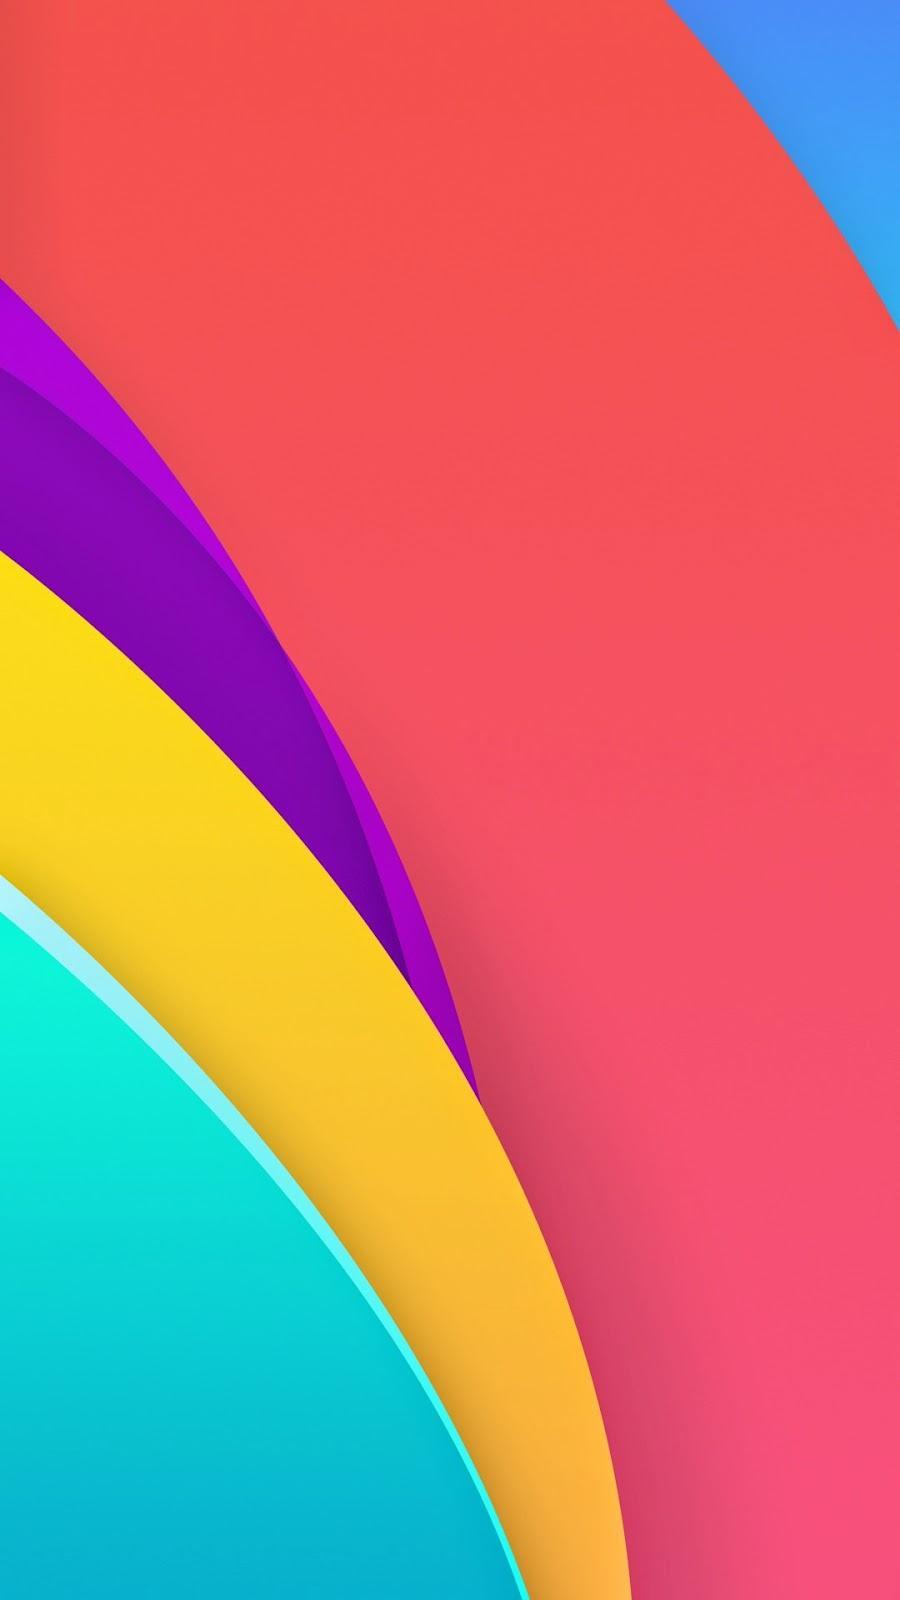 Oppo F5 Youth WallPaper HD for Android - APK Download